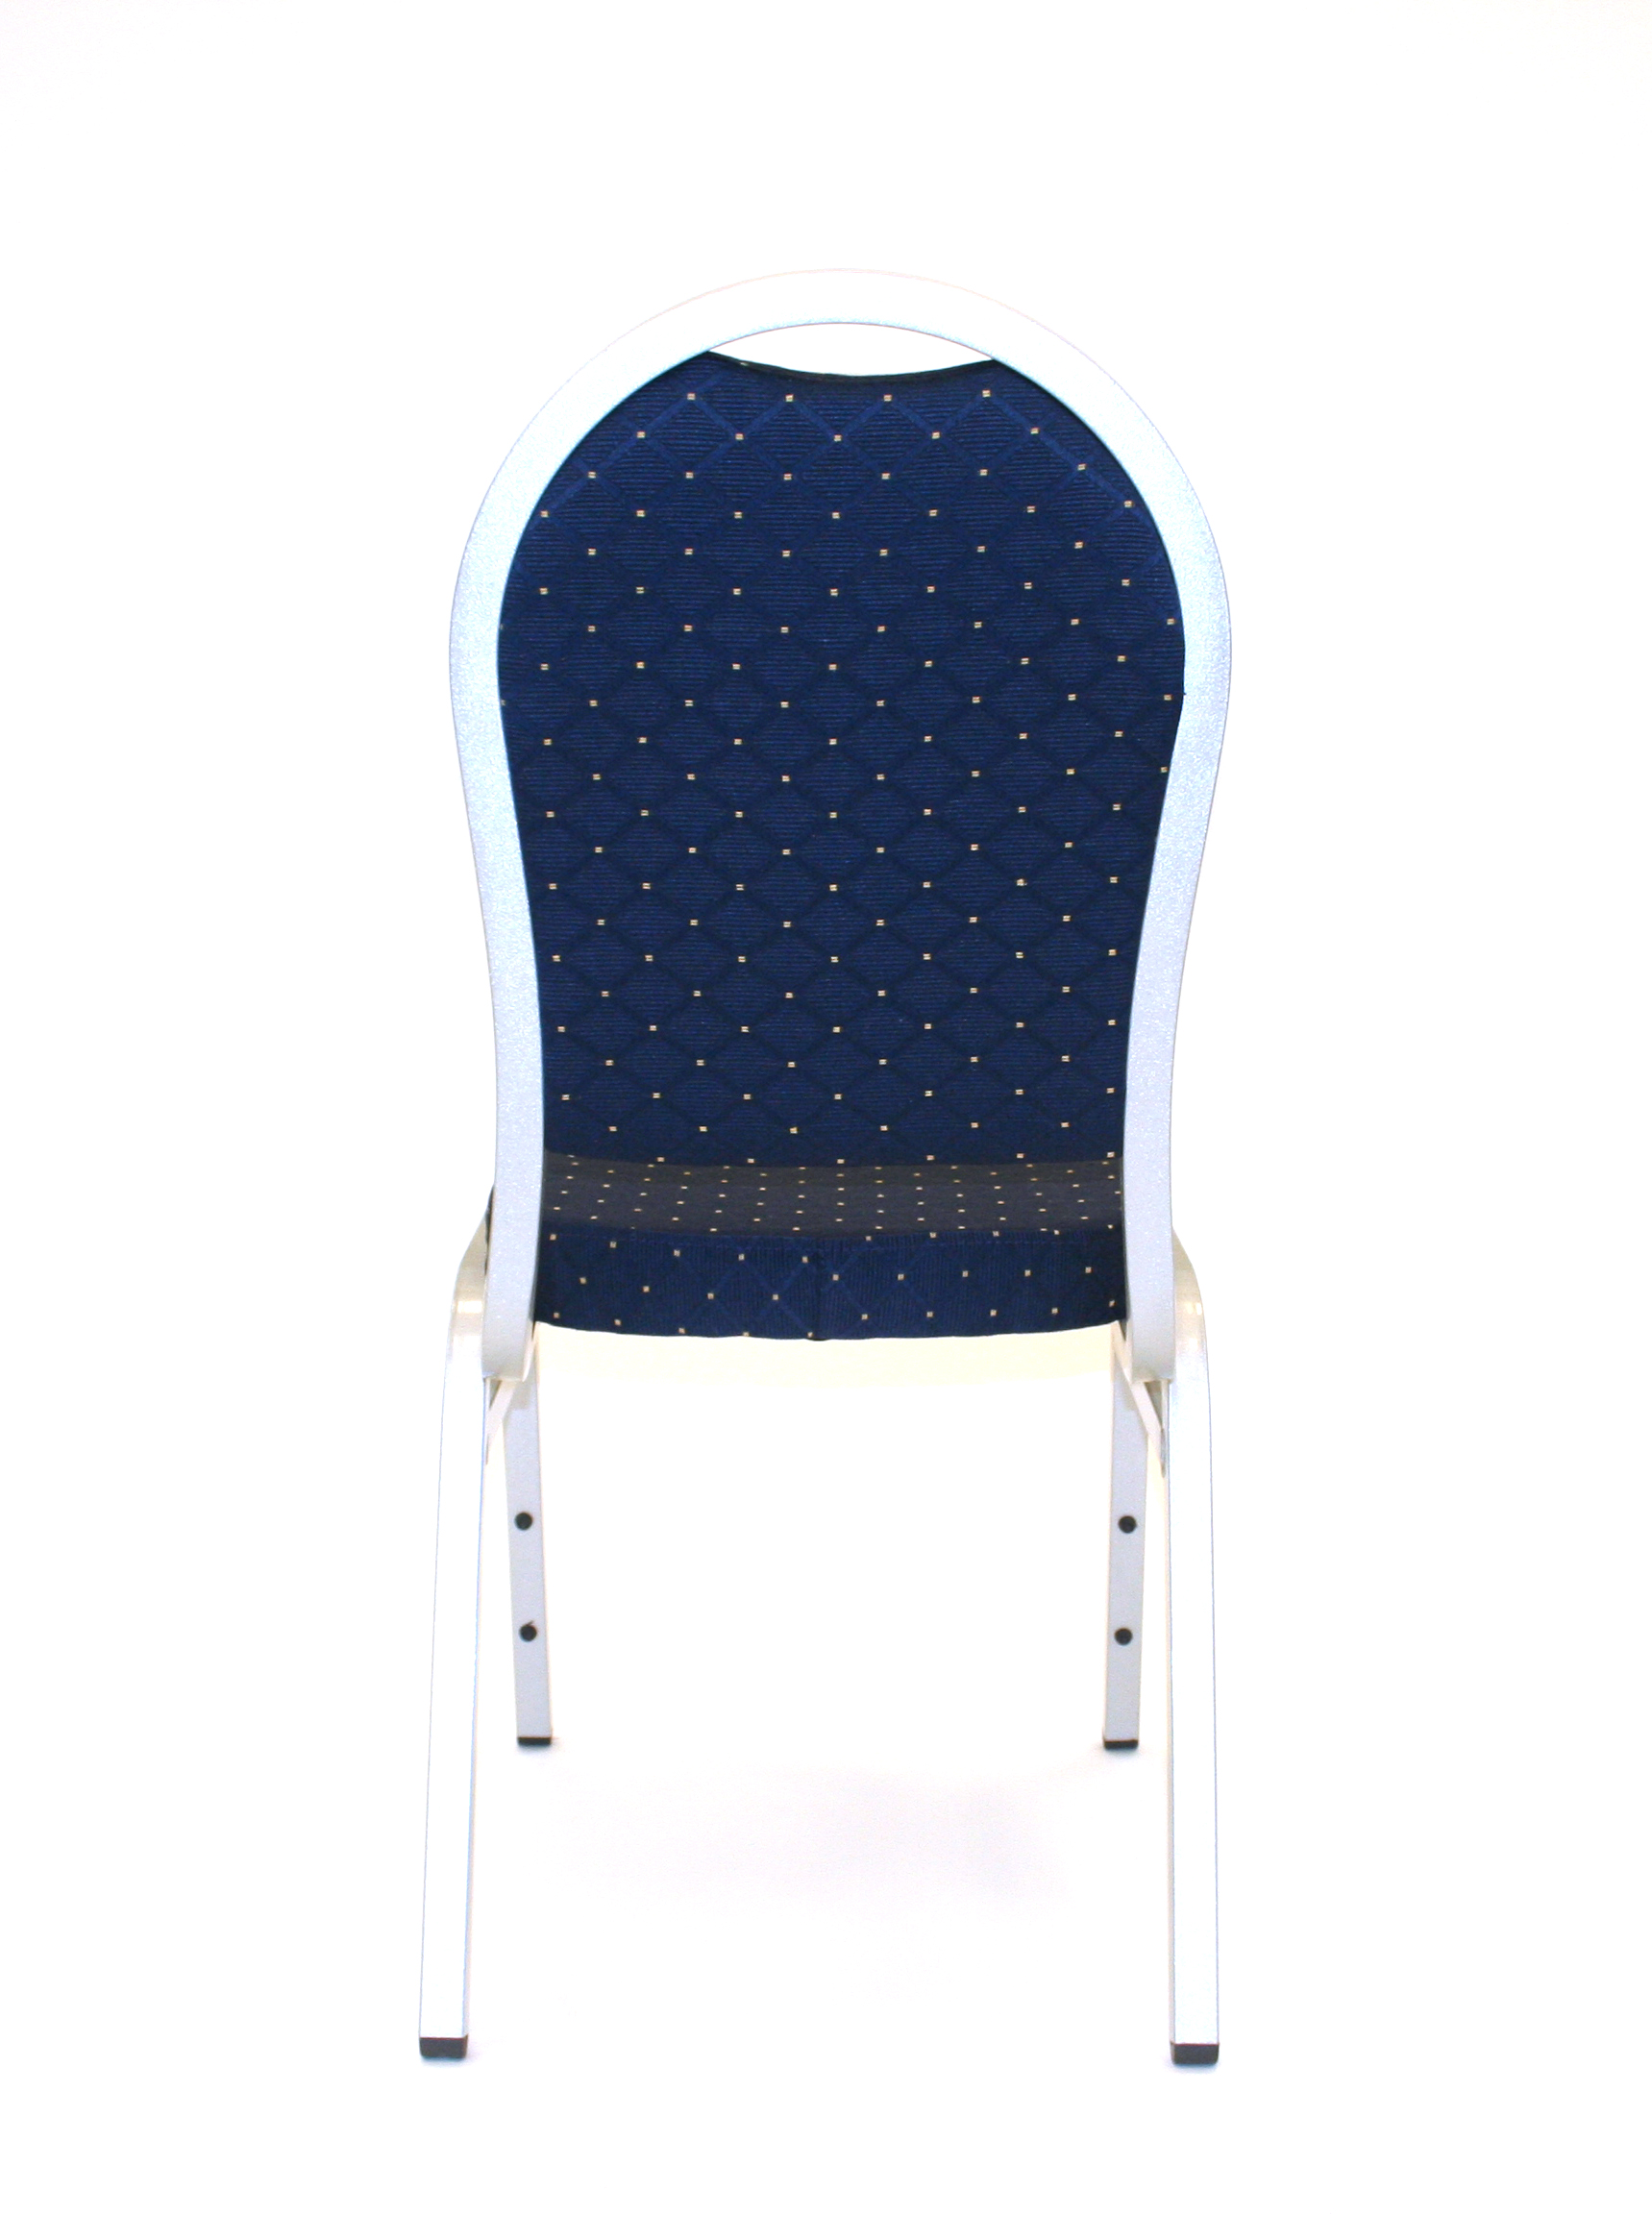 Blue & silver banquet conference chair - BE Event Hire